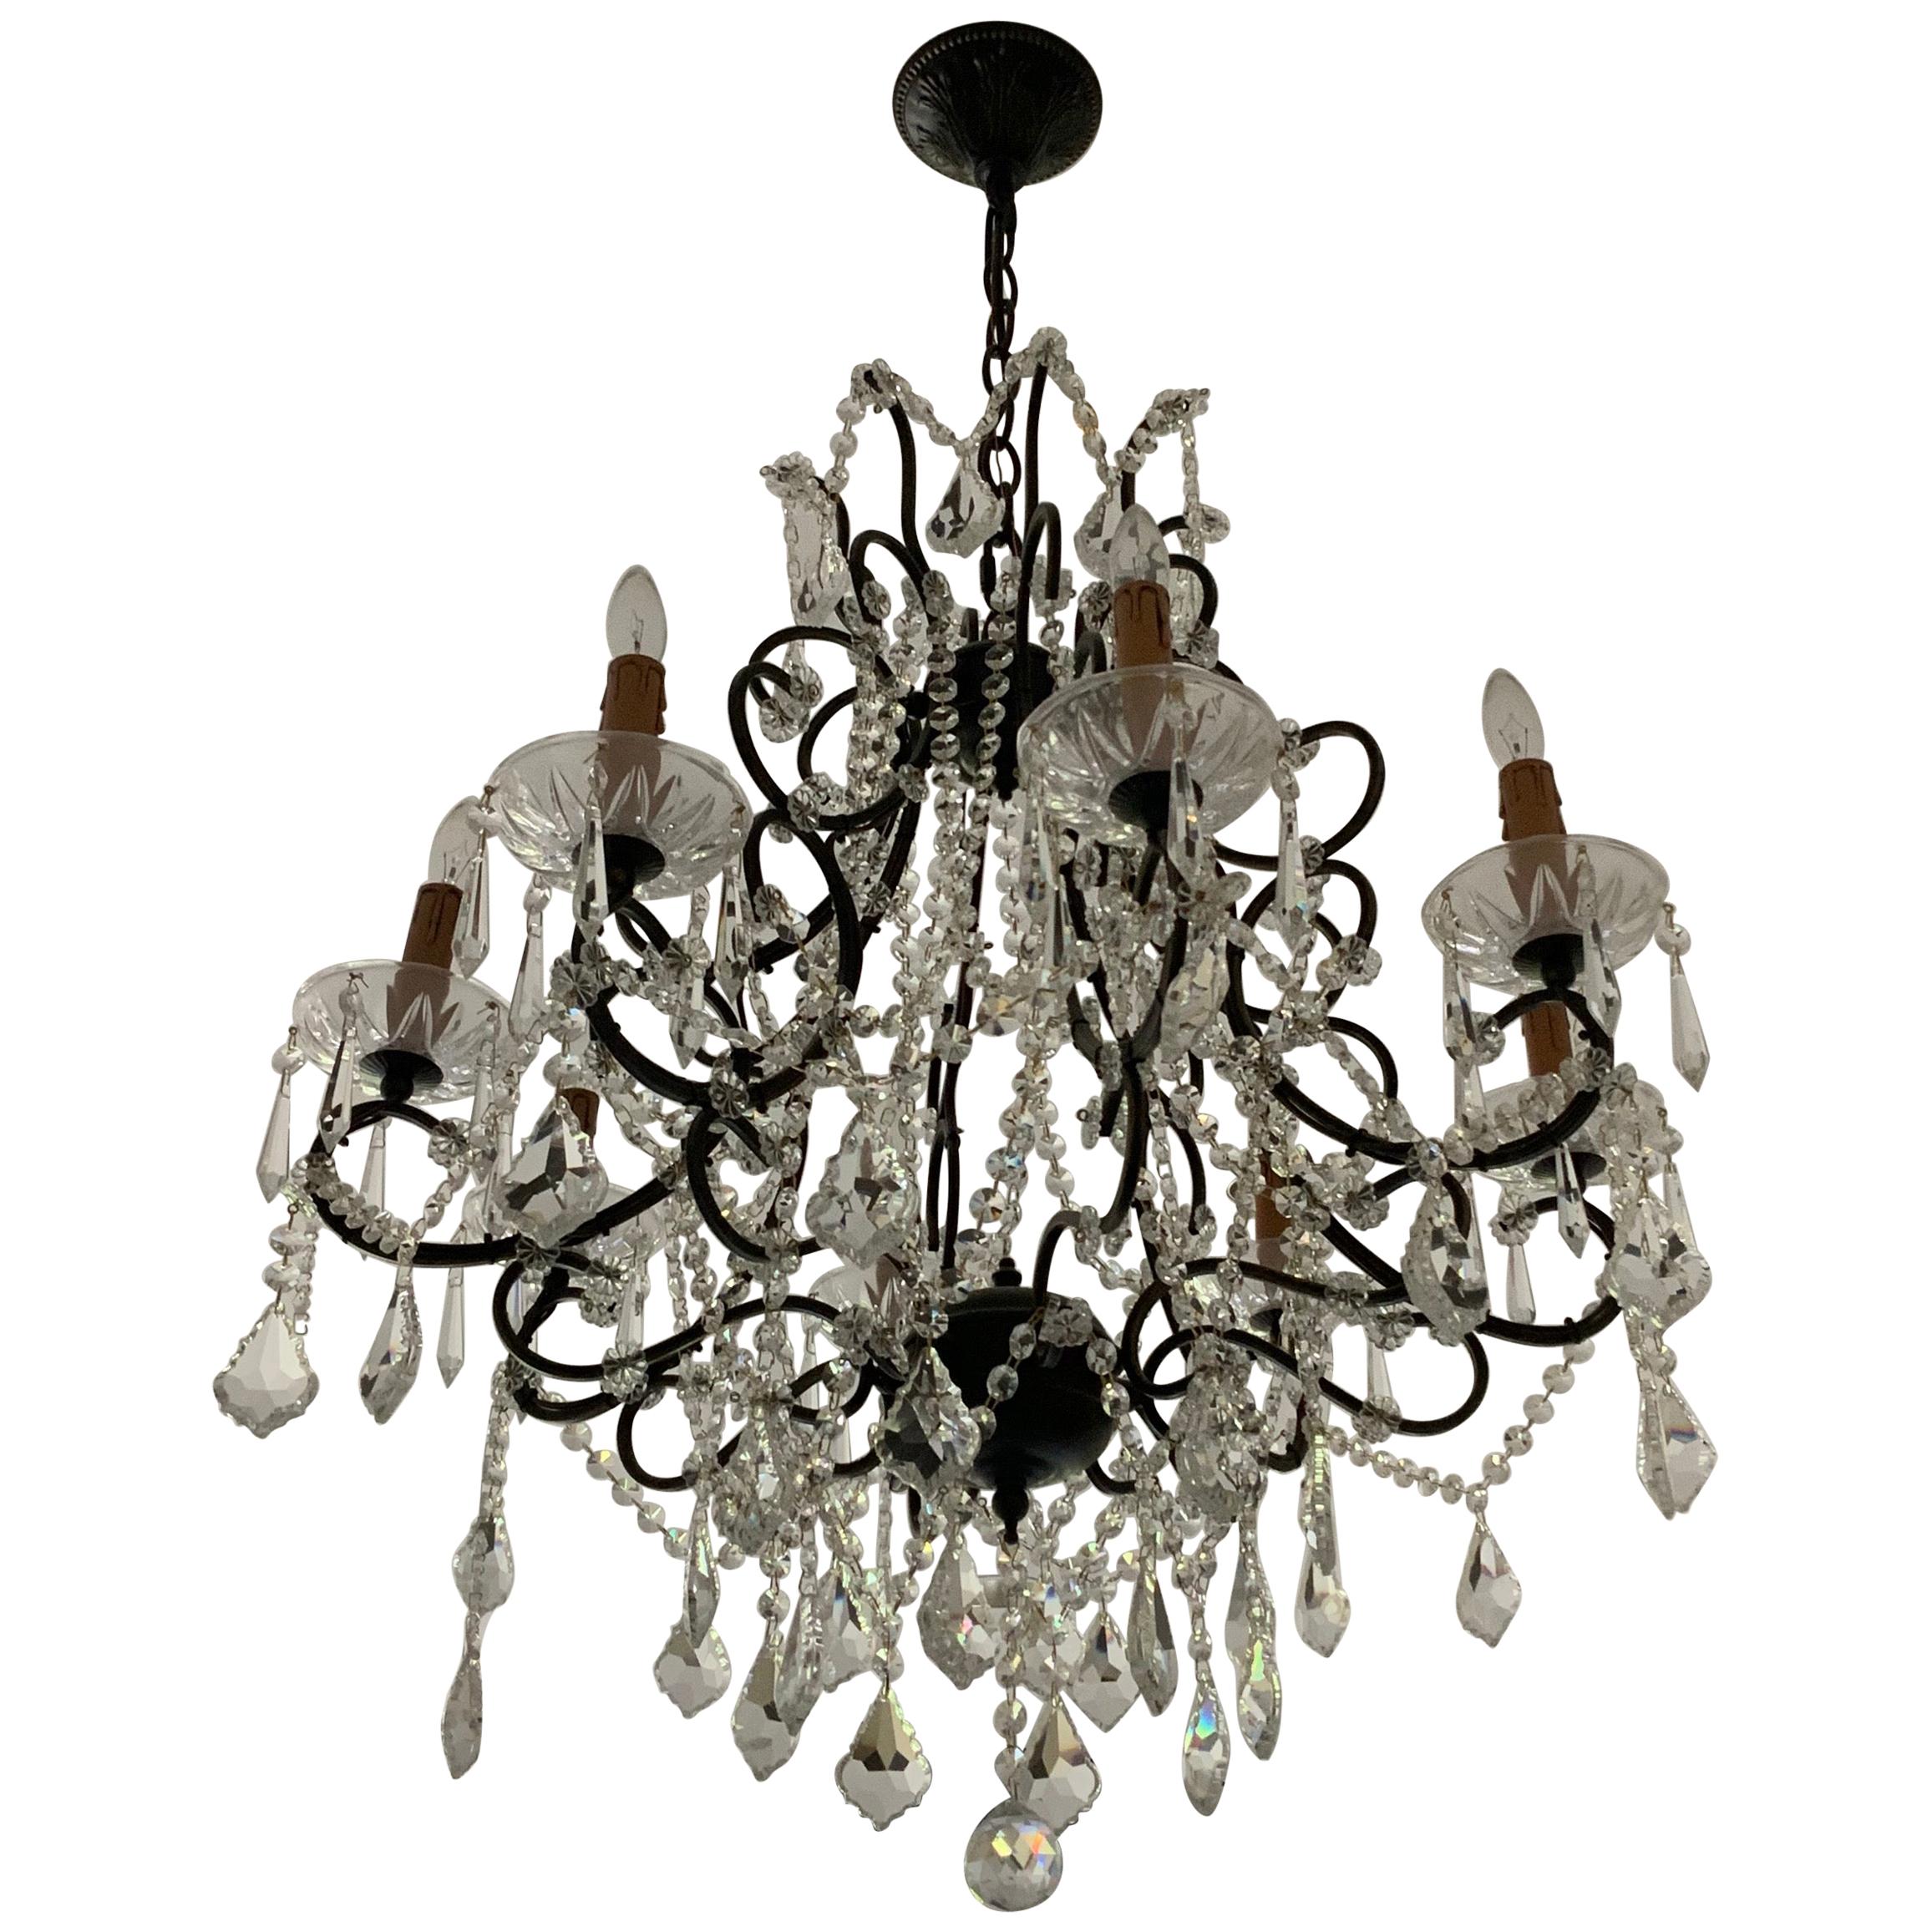 19th Century Crystal & Bronze Chandelier from France